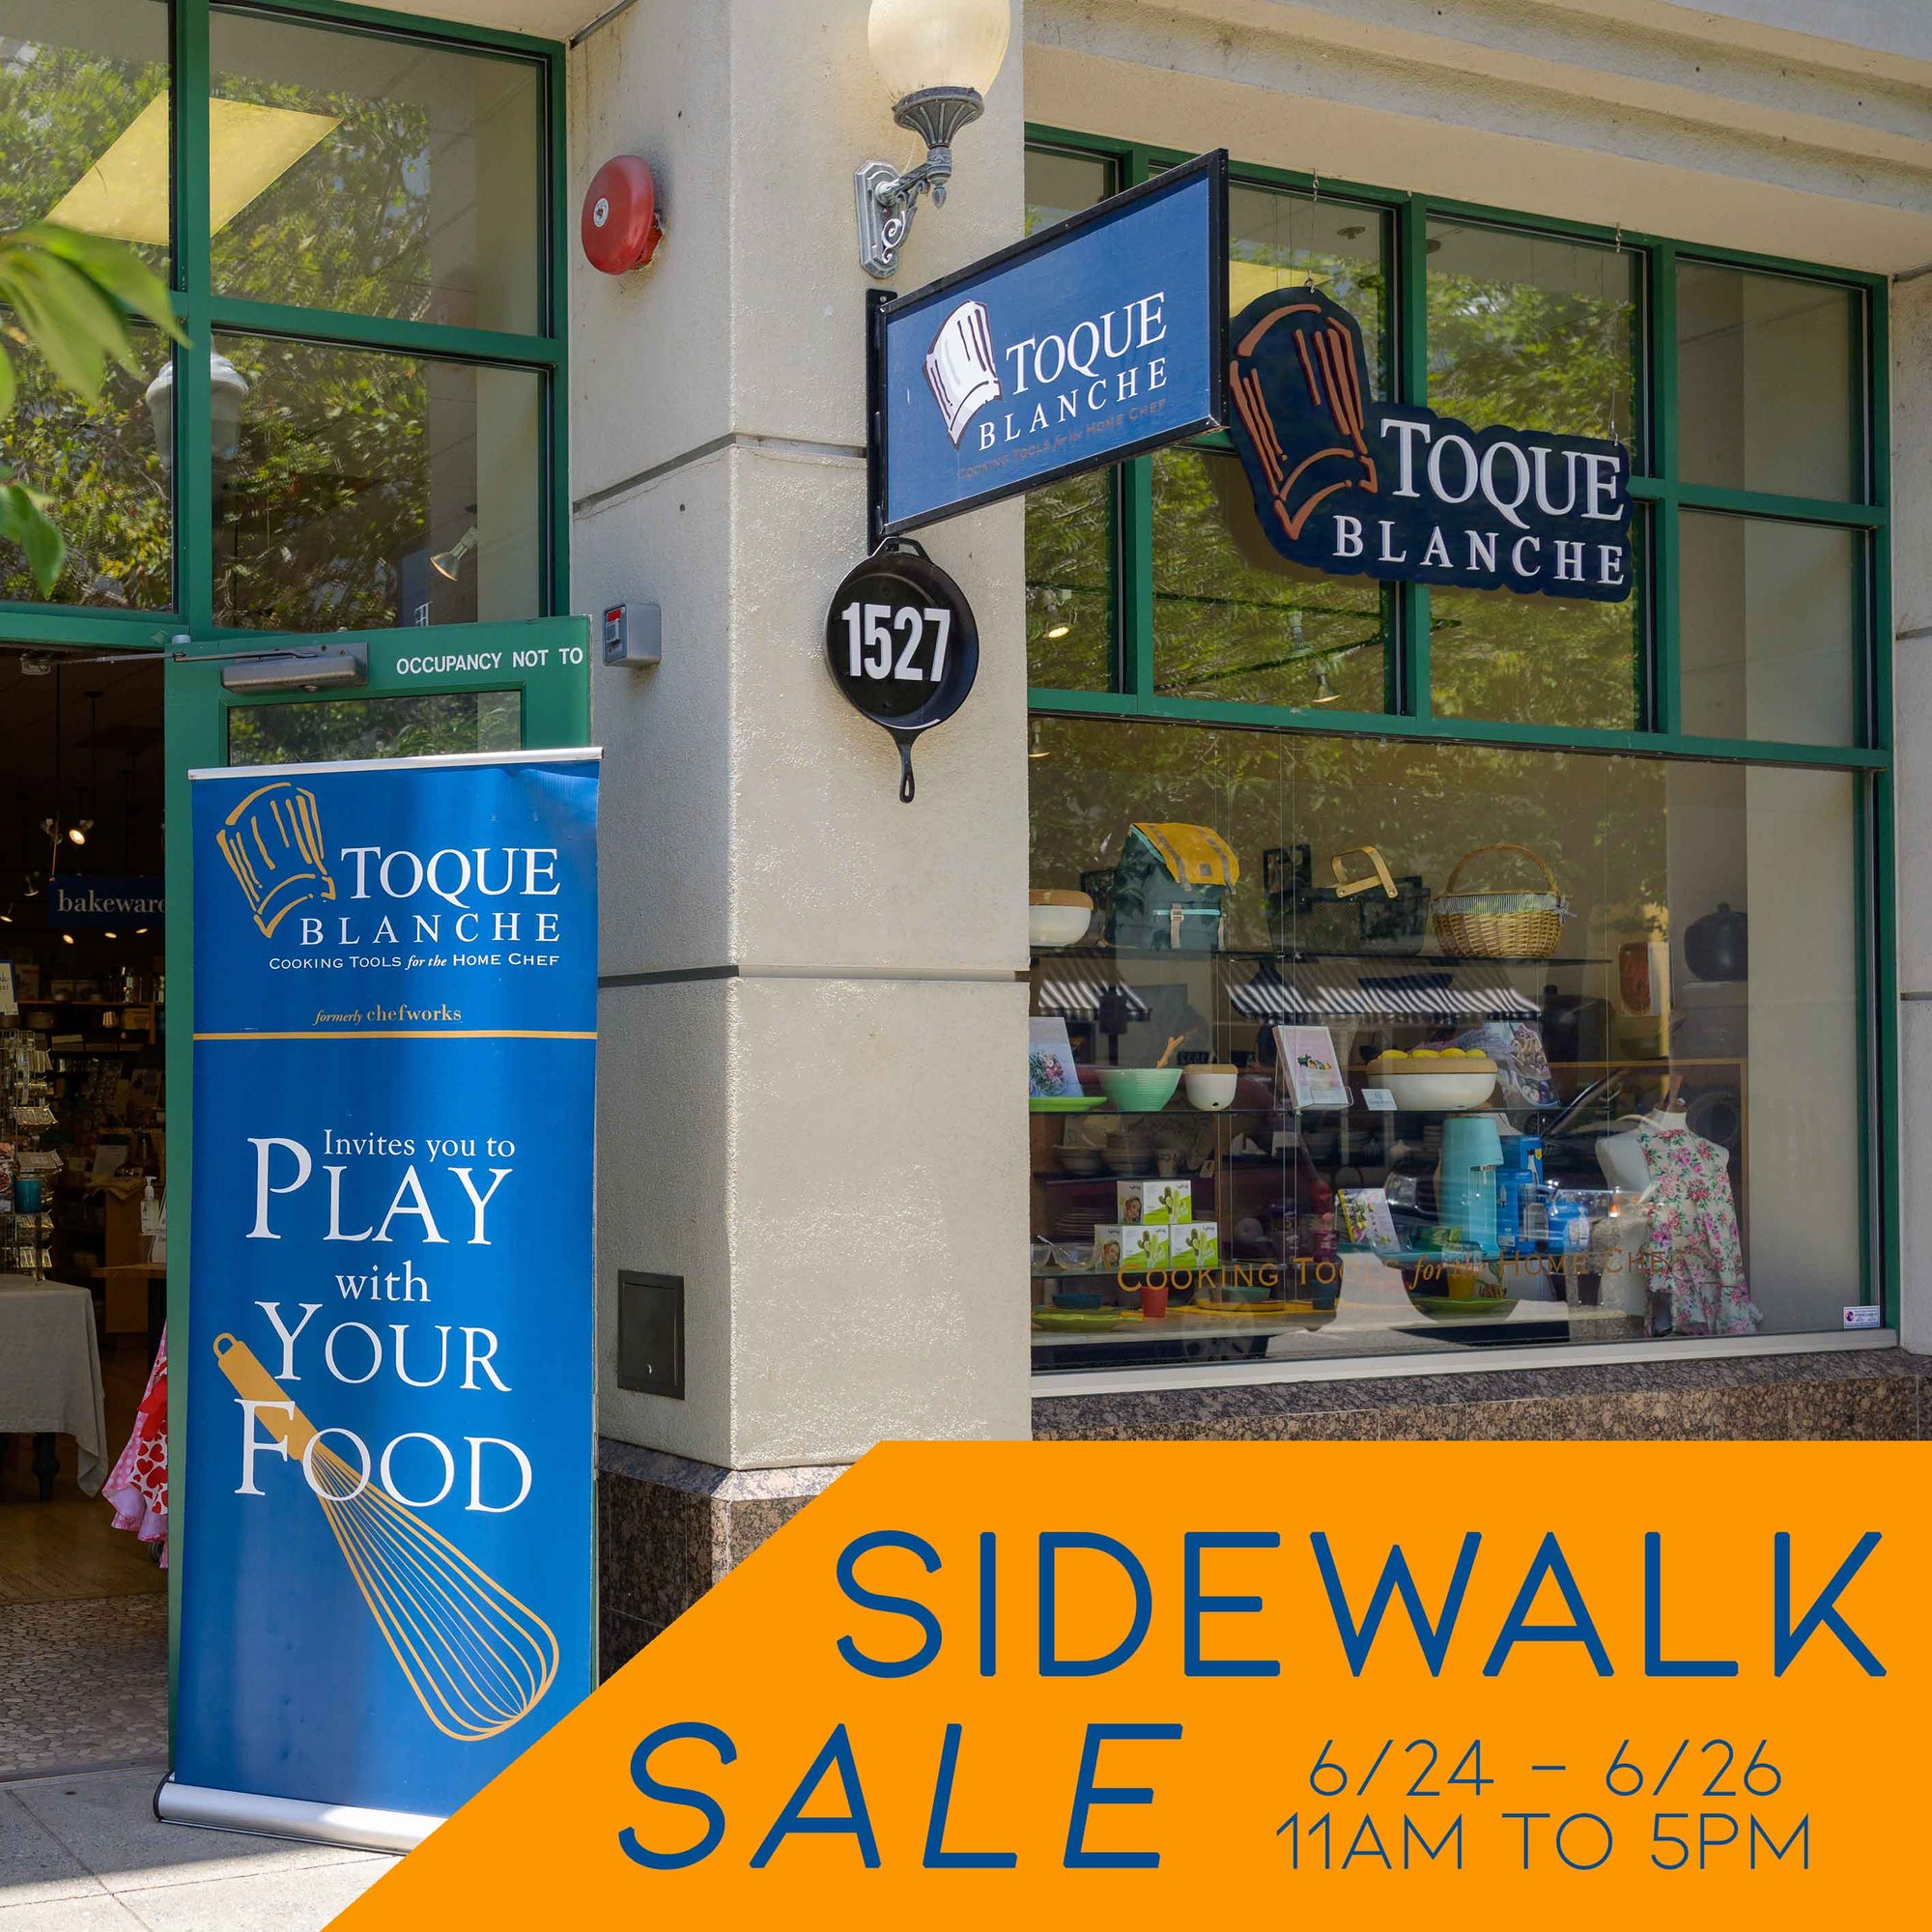 Join us for another fabulous Sidewalk Sale!